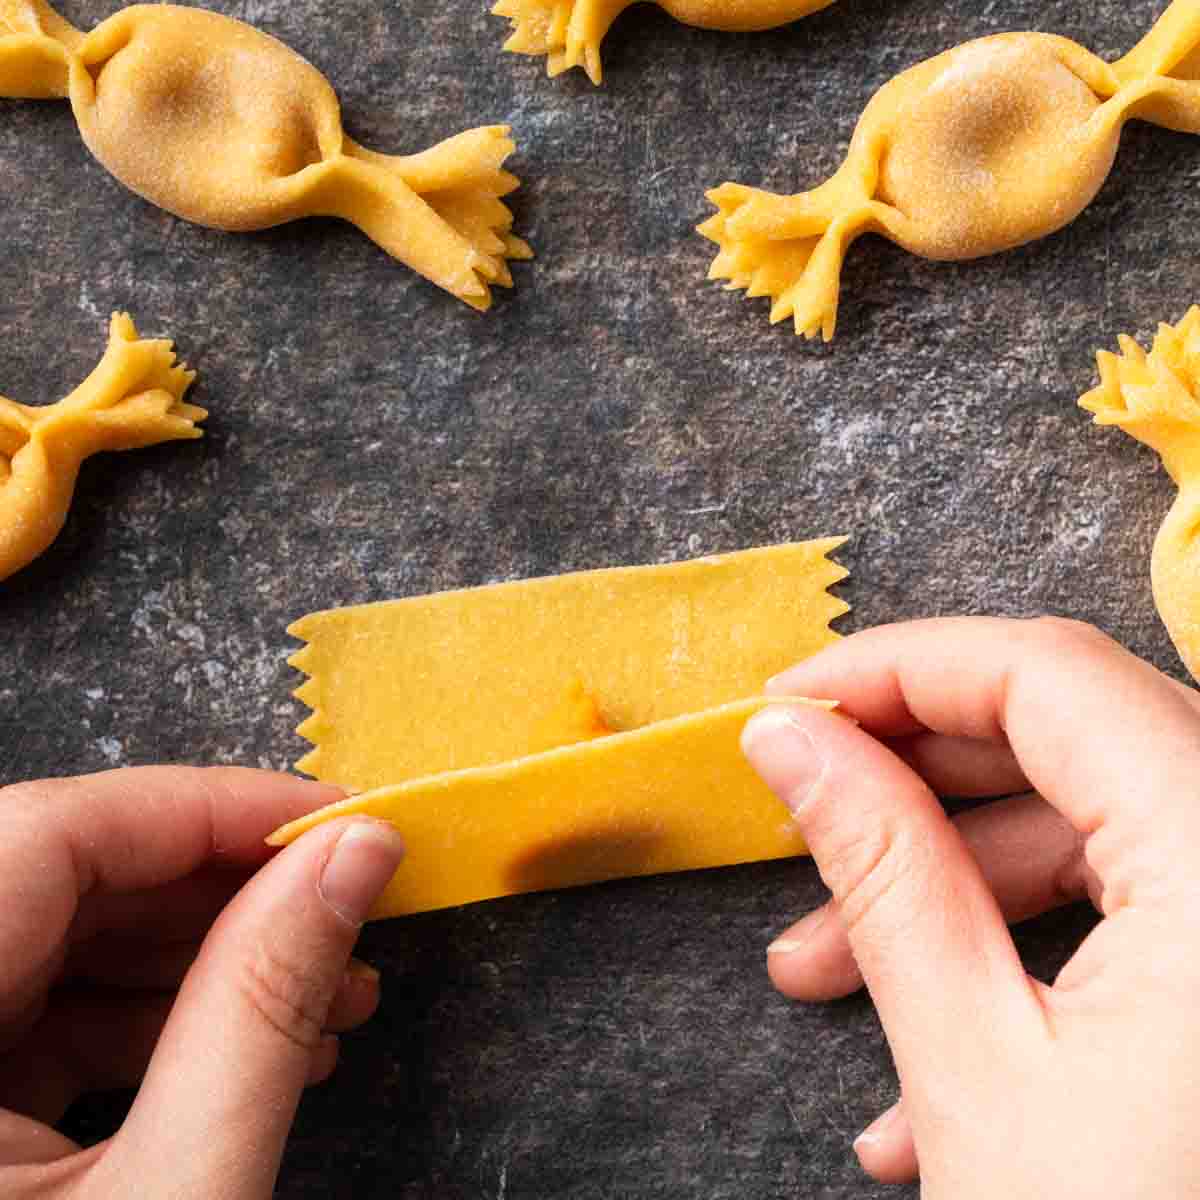 Rolling the pasta dough over the dollop of sweet potato filling.